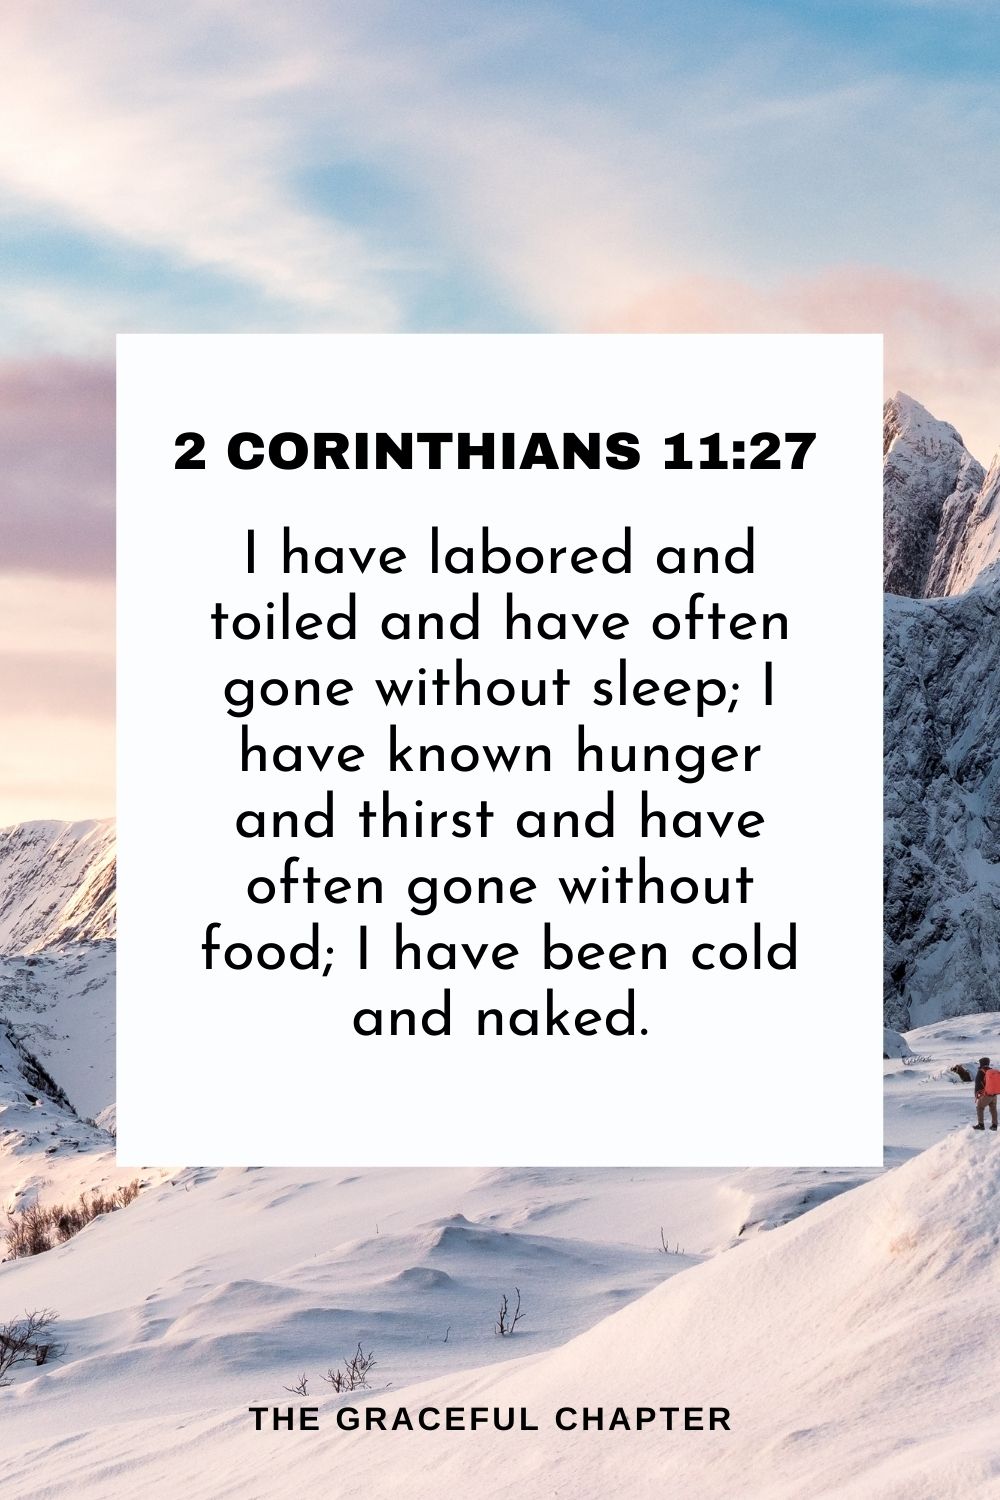  I have labored and toiled and have often gone without sleep; I have known hunger and thirst and have often gone without food; I have been cold and naked. 2 Corinthians 11:27